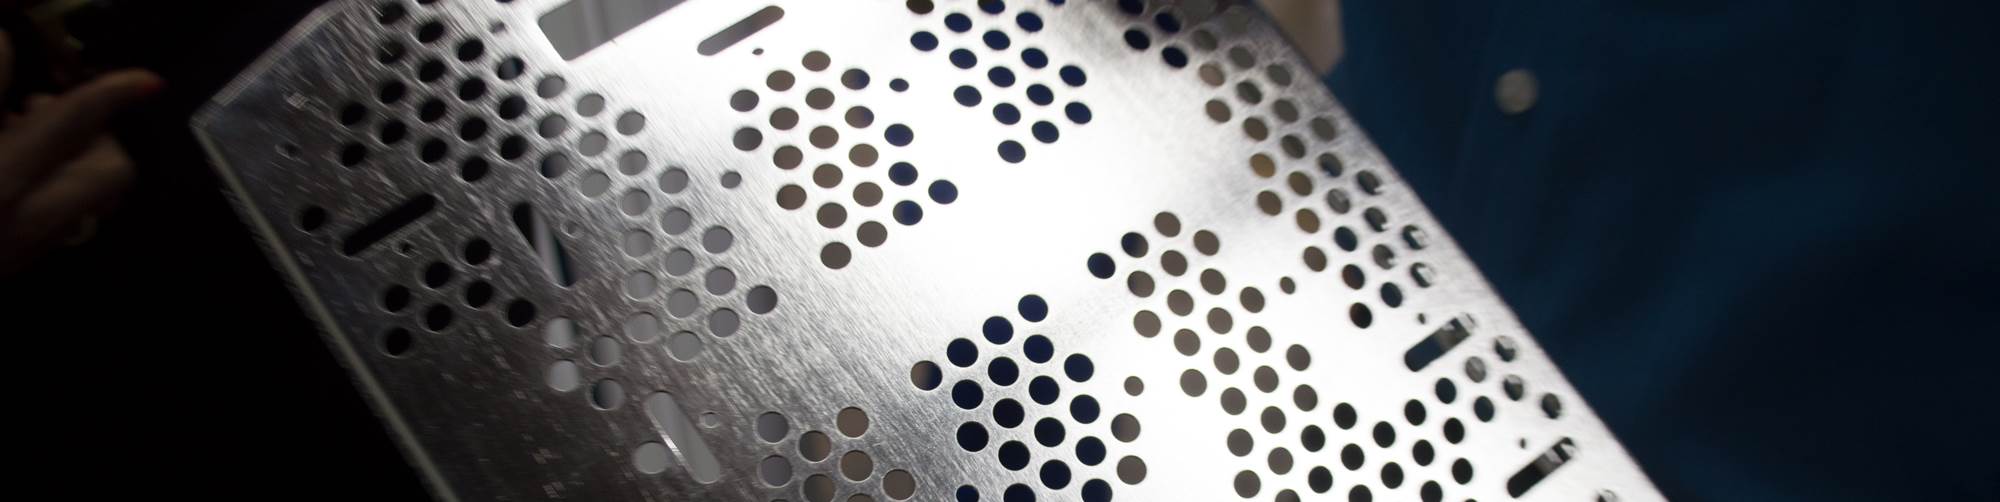 Electropolishing also is commonly called electrochemical or electrolytic polishing.